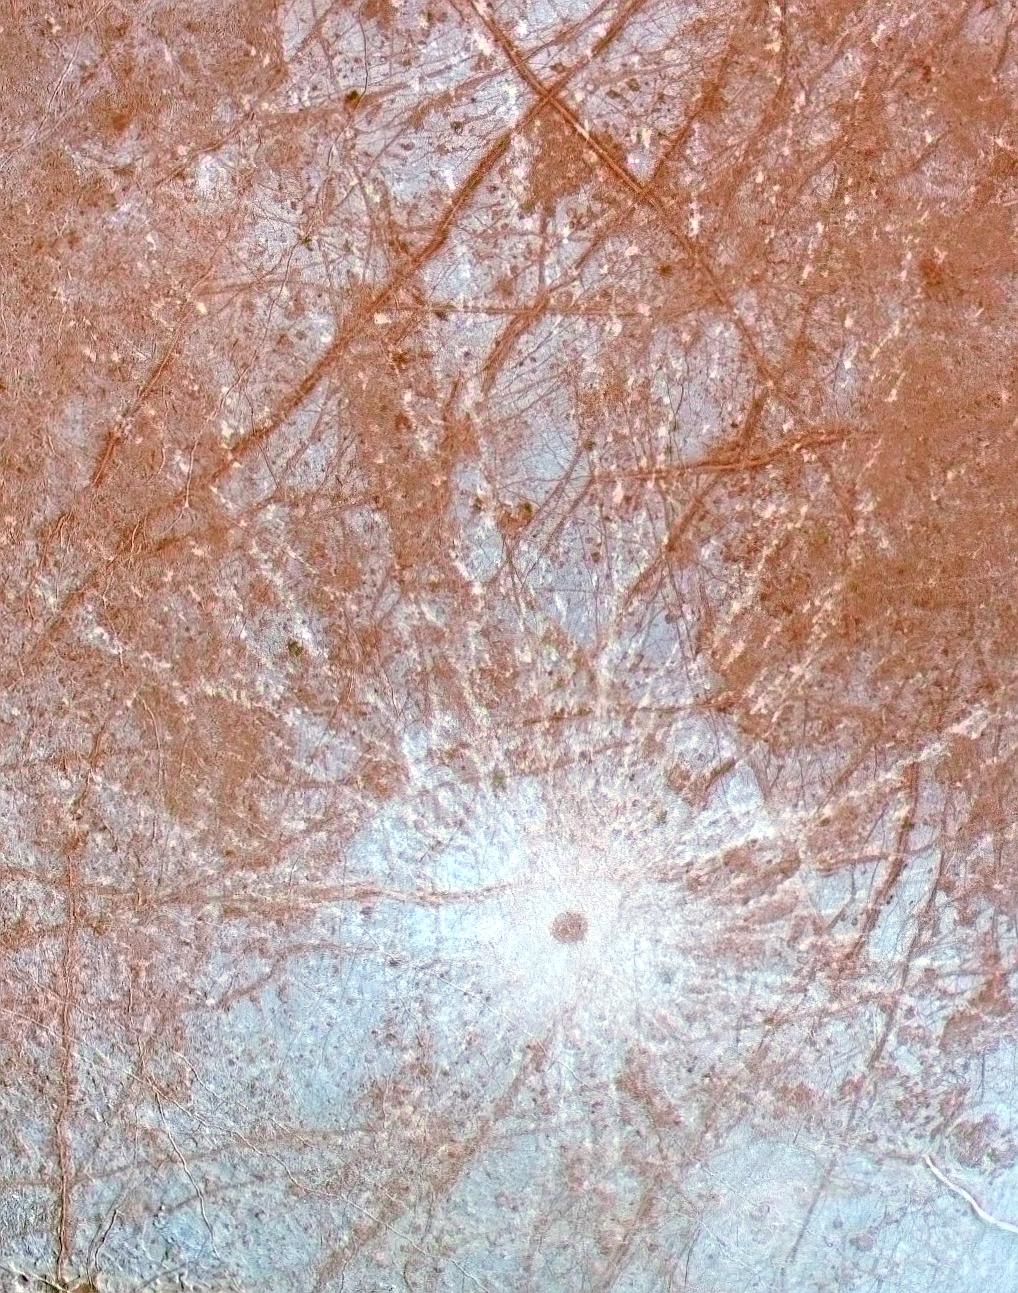 Impact crater on Europa.